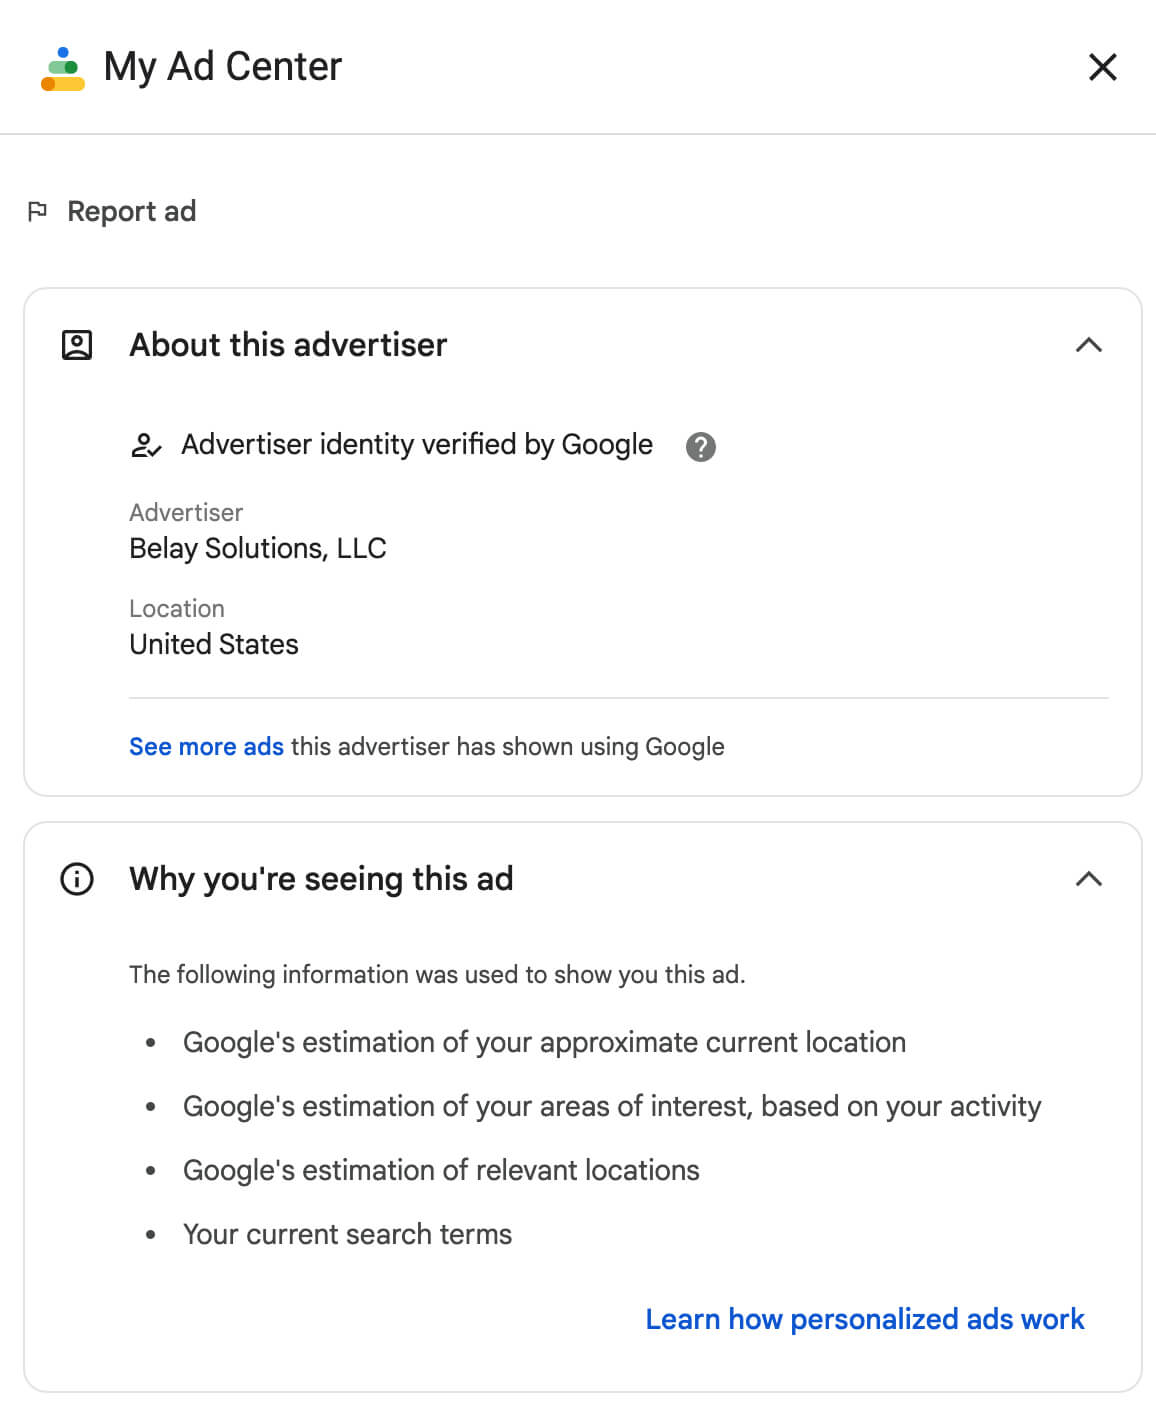 google-ads-transparency-center-youtube-about-this-advertiser-identity-belay-solutions-llc-search-terms-influenced-ad-delivery-11